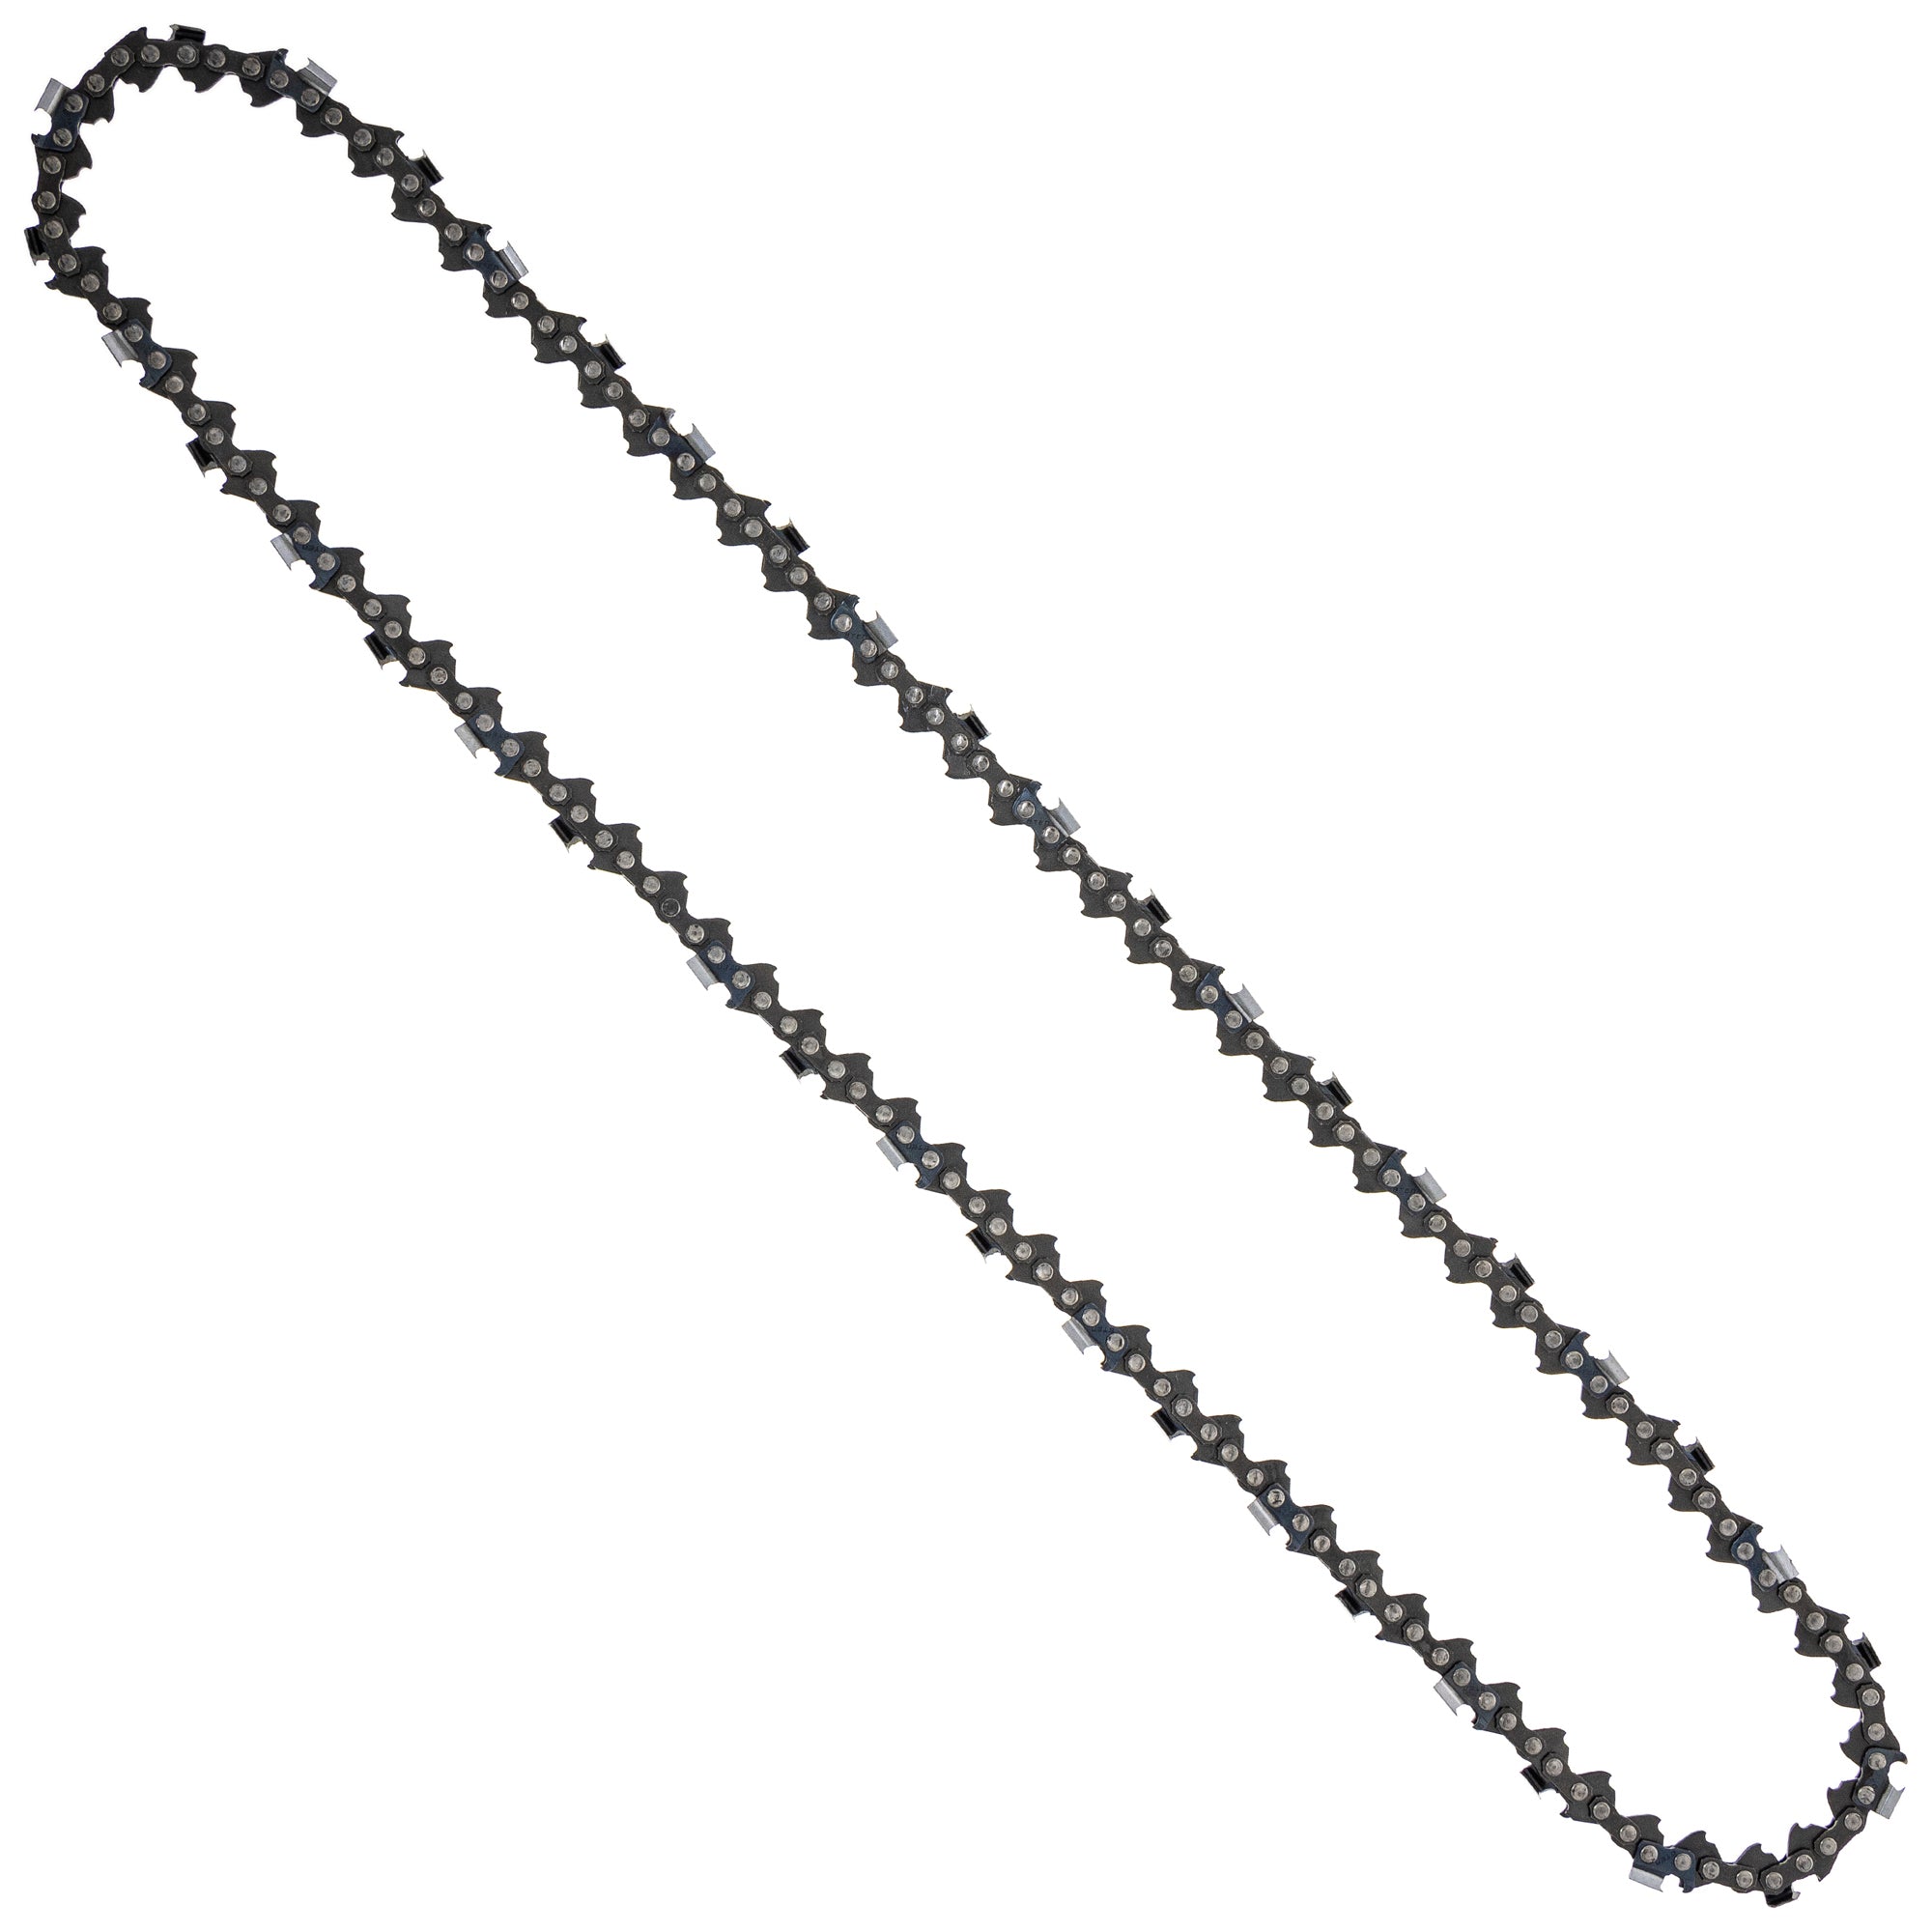 8TEN 810-CCC2279H Chain 3-Pack for zOTHER Stens Oregon MS 634 40 36